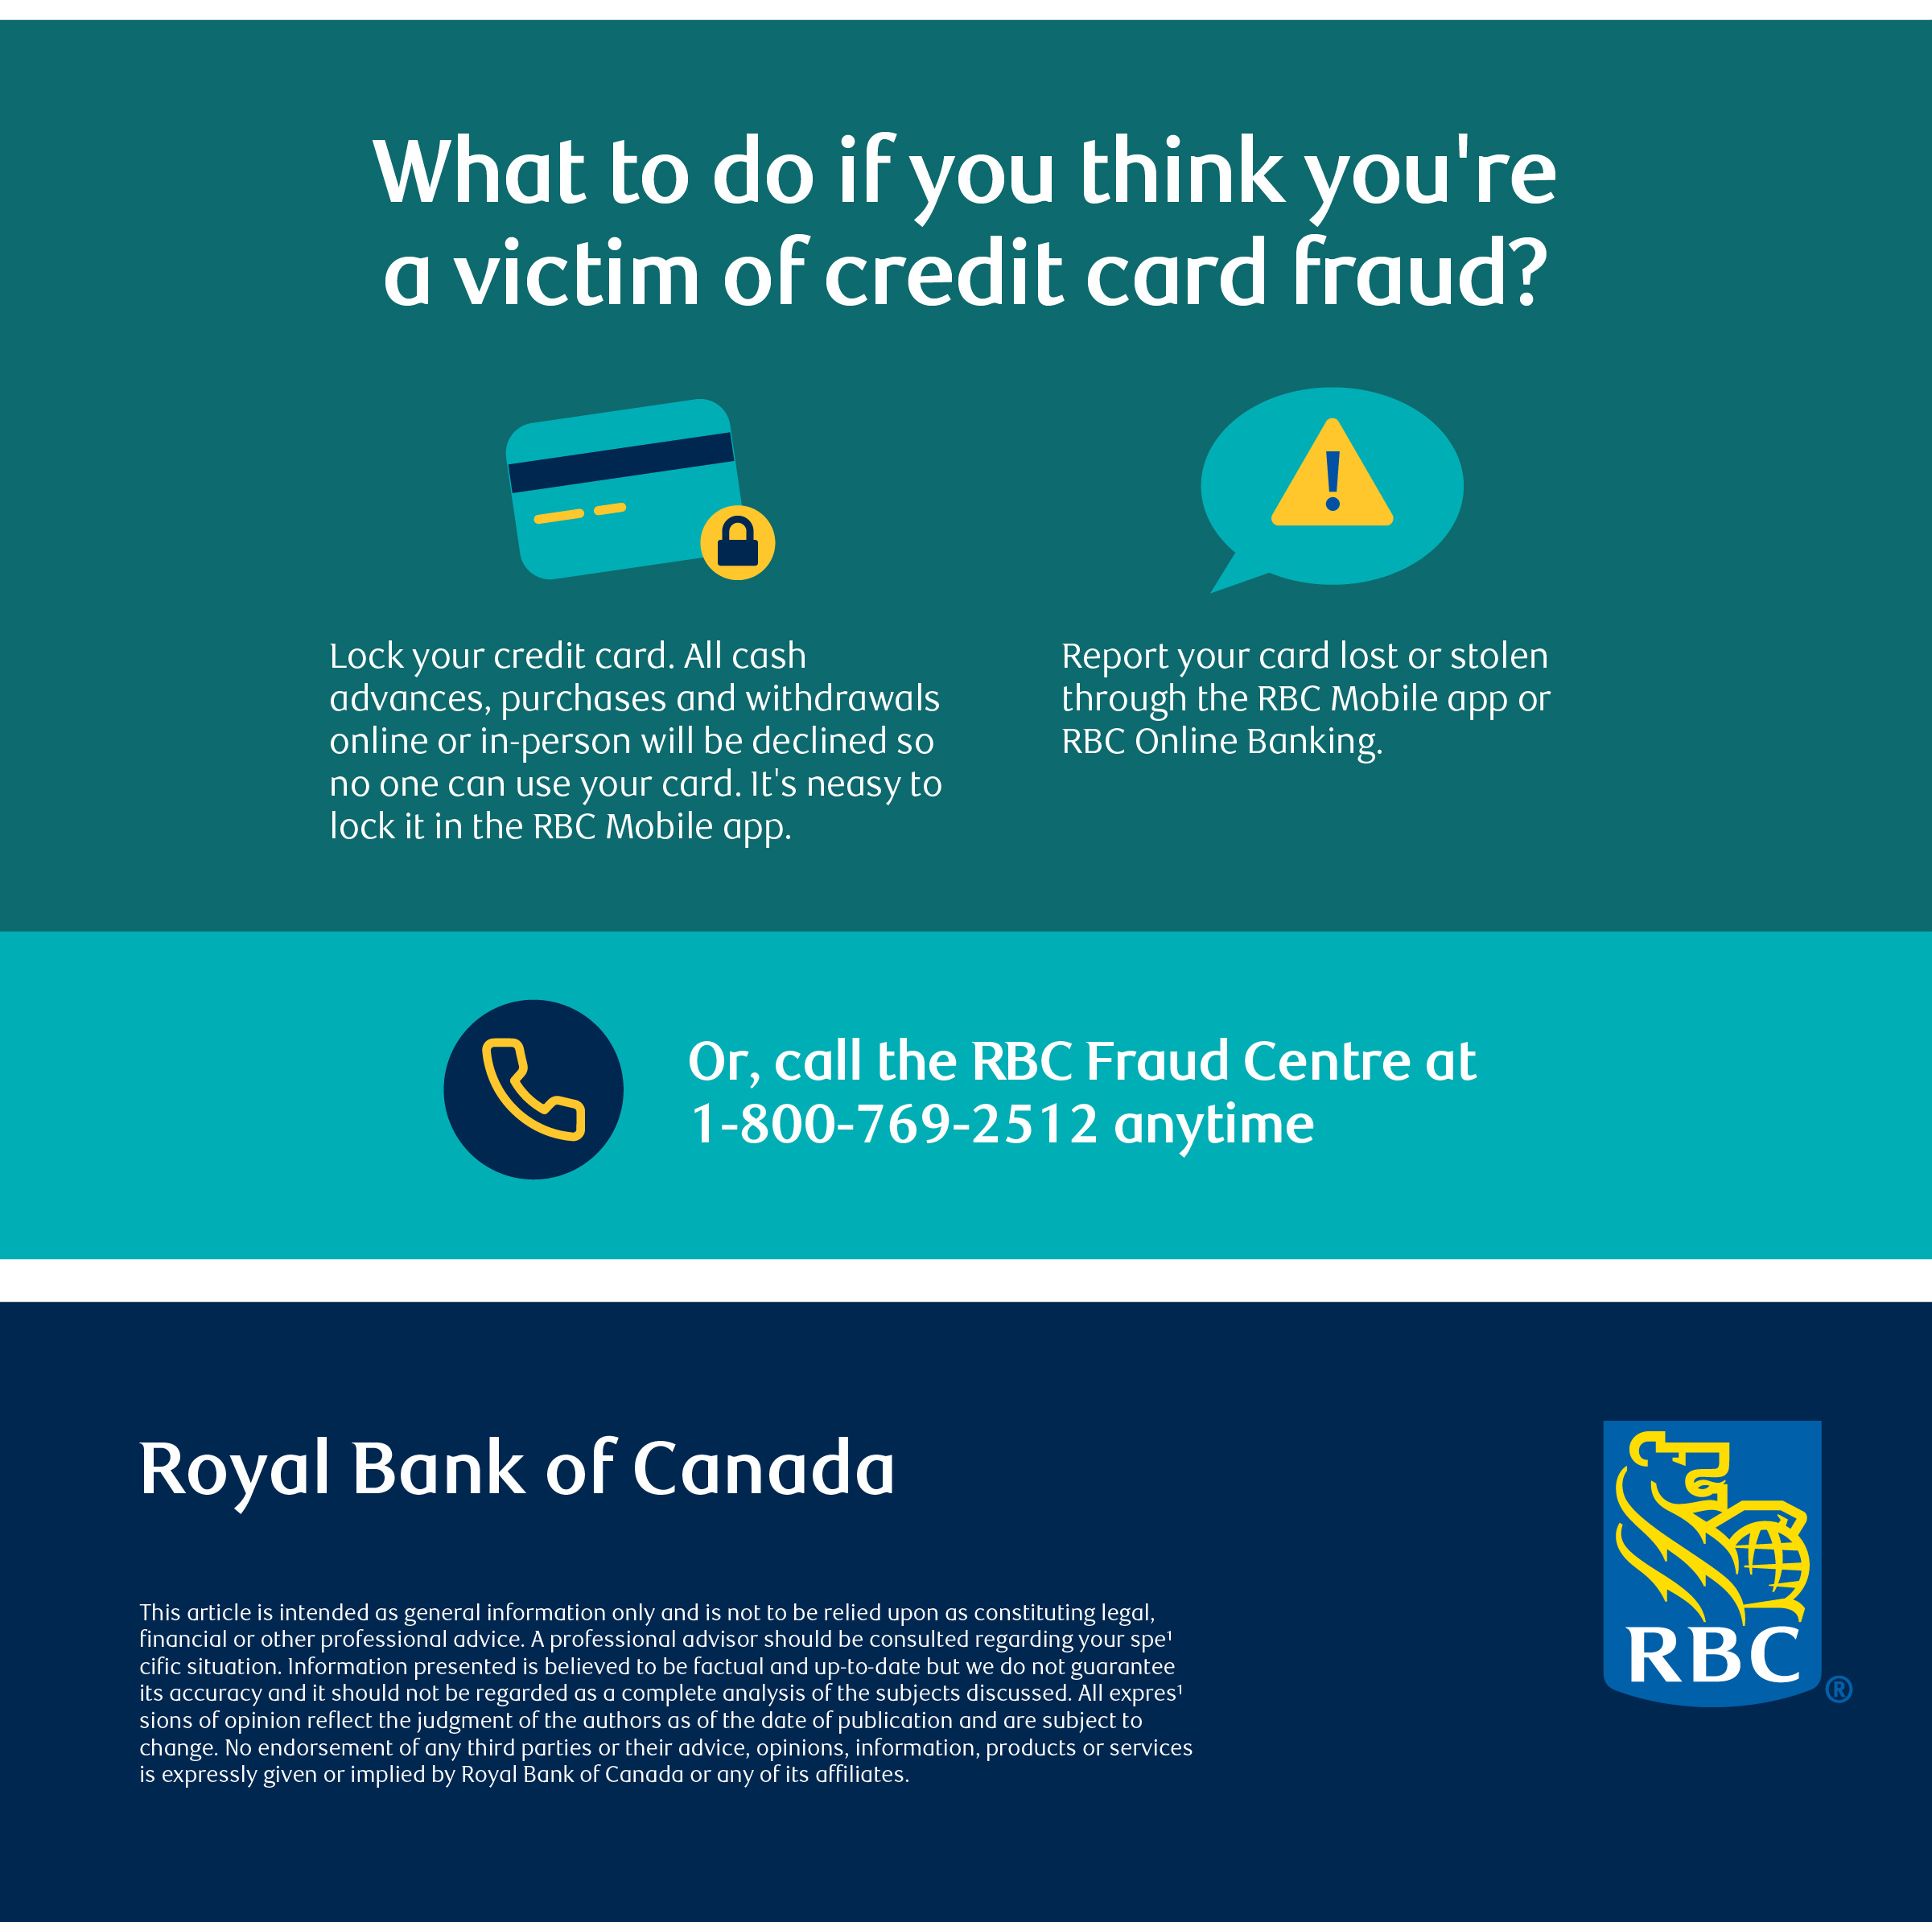 How to Protect Yourself from Credit Card Fraud [INFOGRAPHIC]